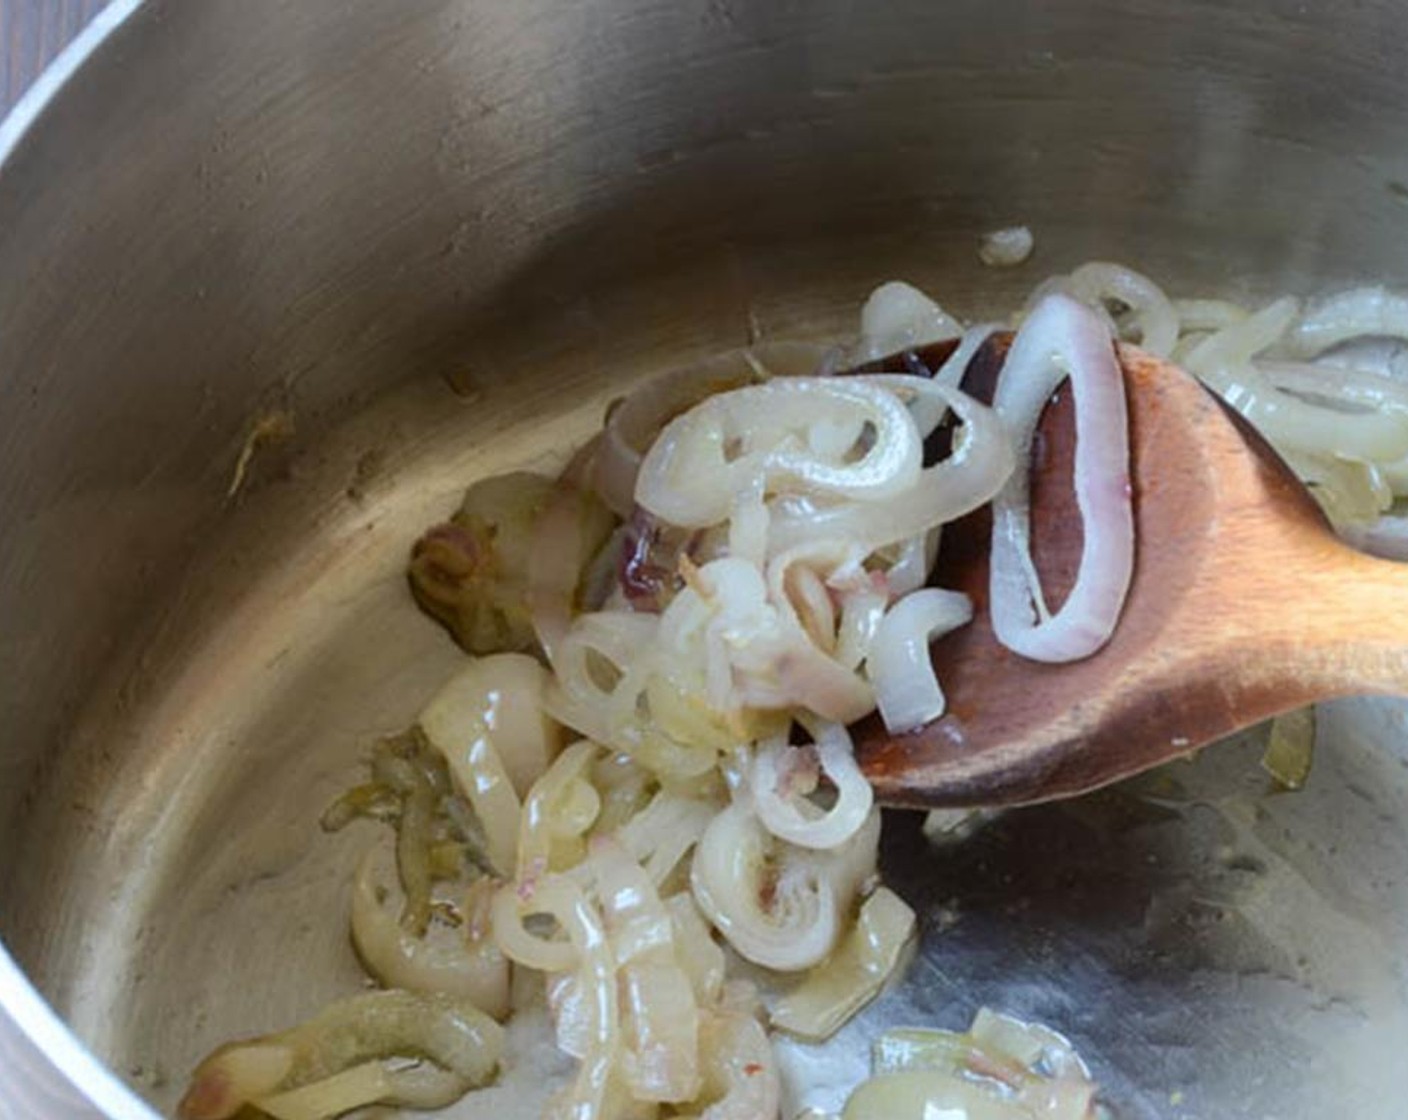 step 3 In a large saucepan, heat the Olive Oil (2 Tbsp) over medium heat and add the Shallots (2) that have been peeled and sliced, and 1/4 teaspoon of the Kosher Salt (1/4 tsp). Cook until the shallots soften and become translucent.